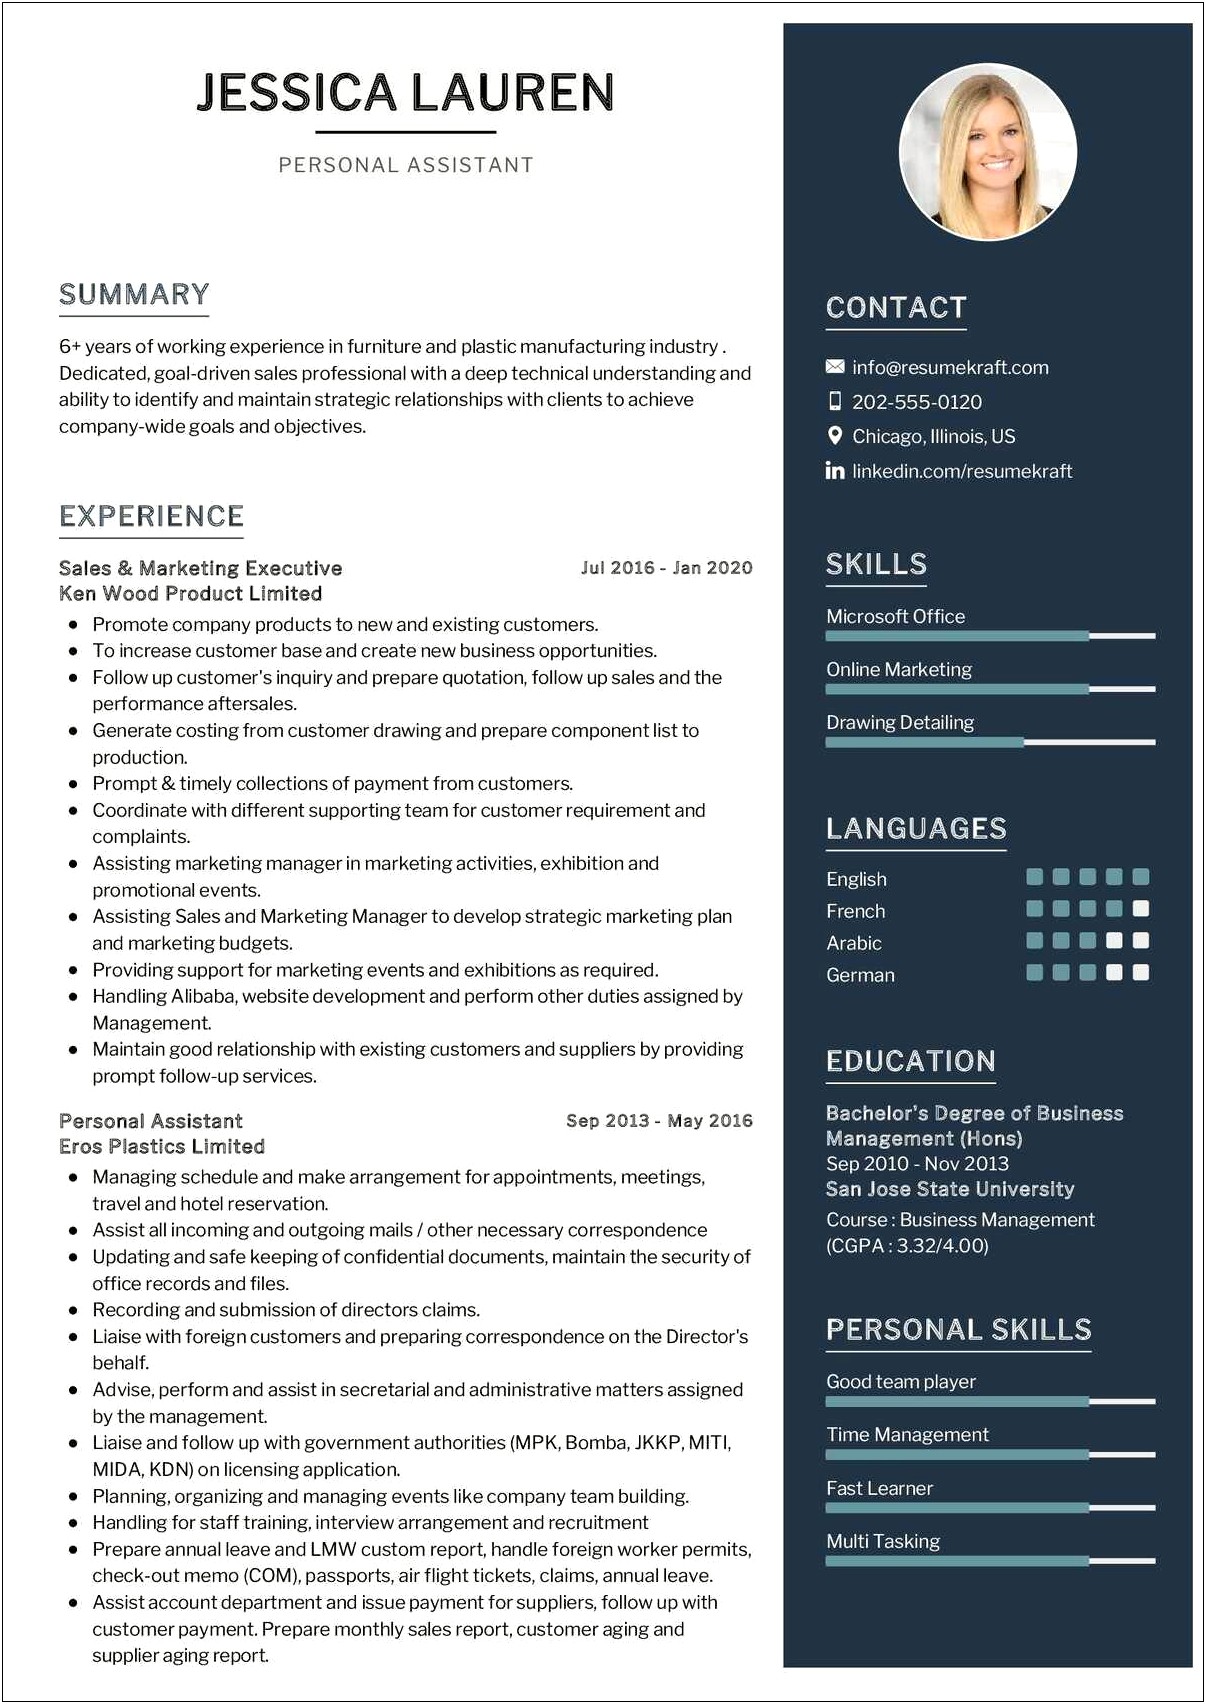 Skills In Your Resume Virtual Assistant